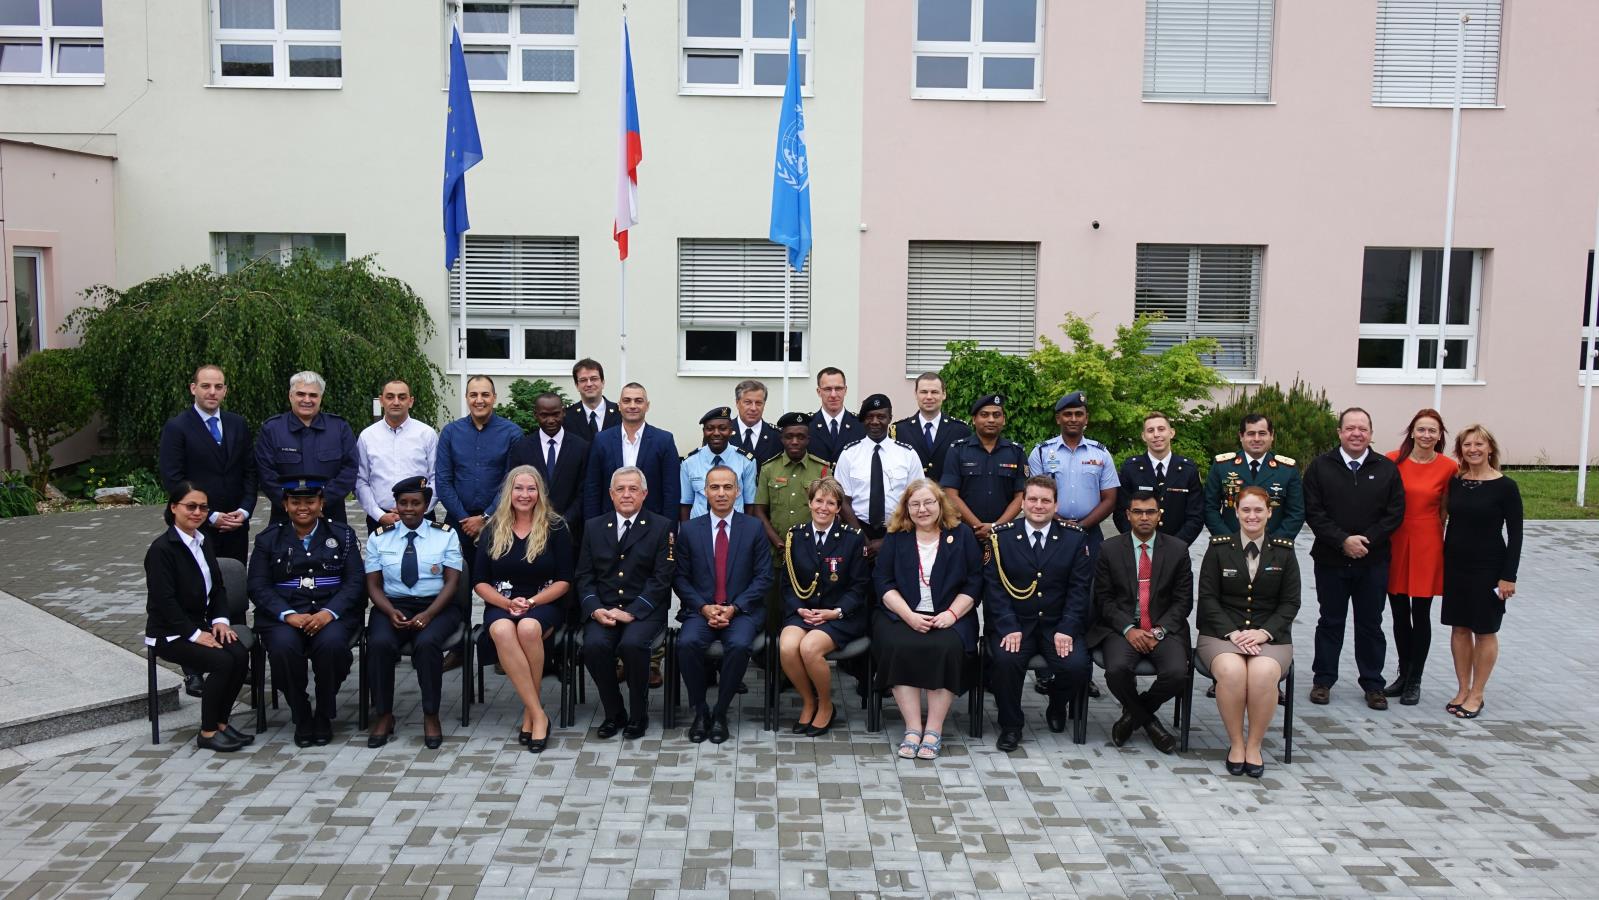 000_OPCW_2019_official joint photo.jpg